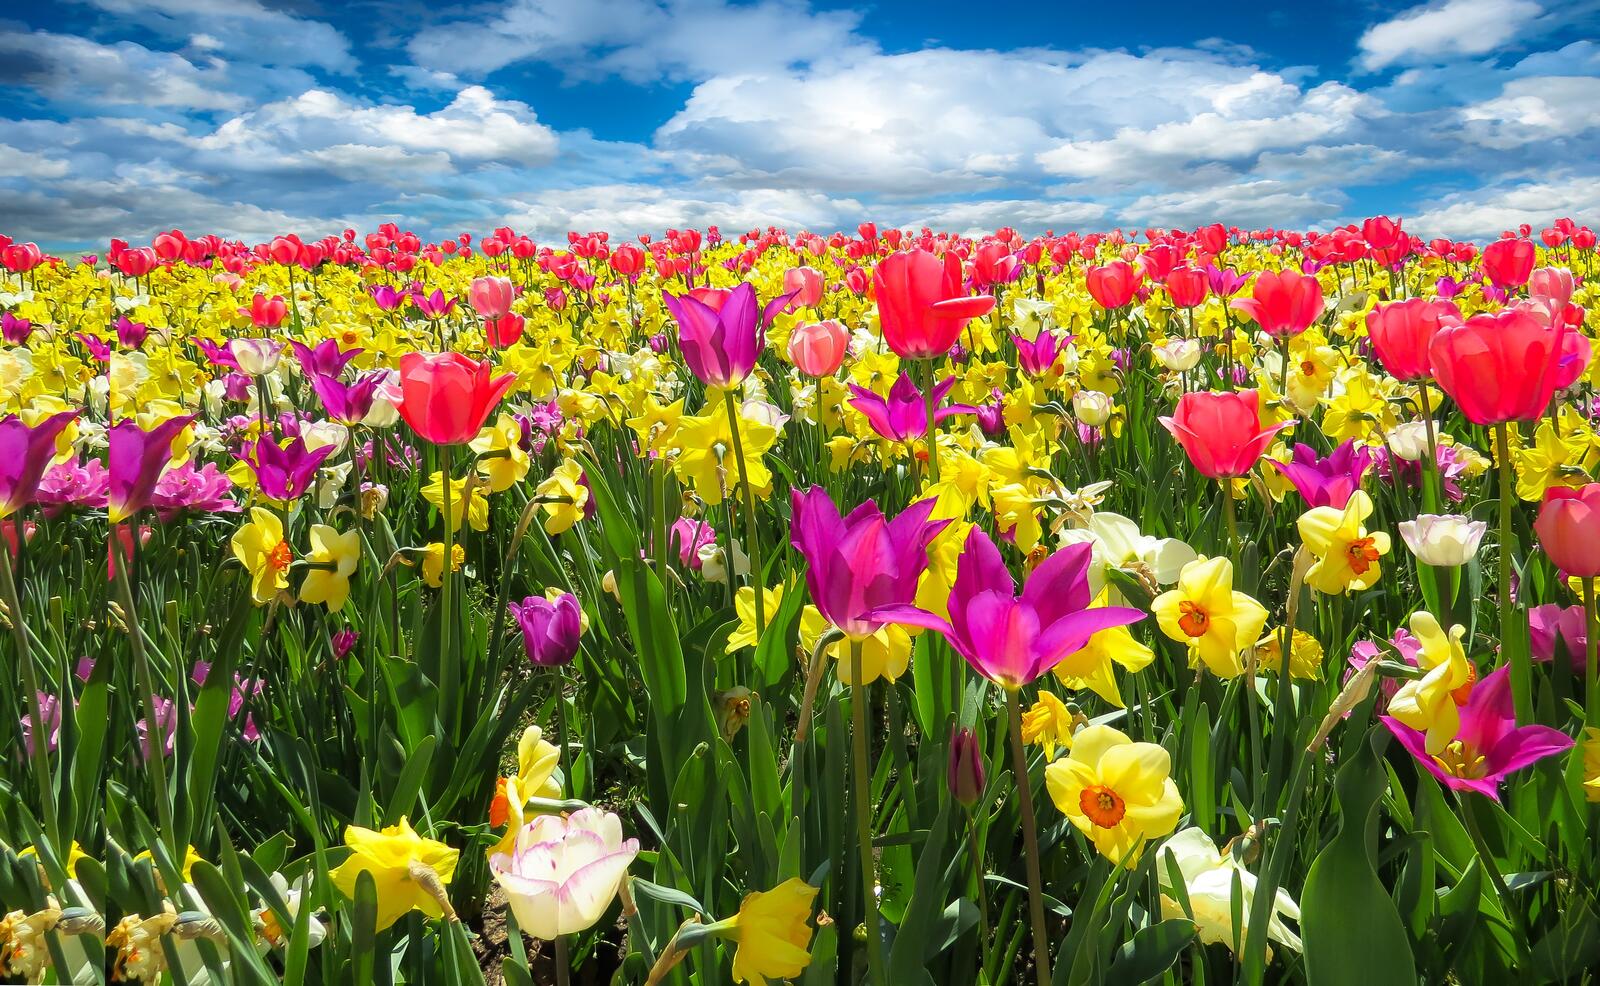 Free photo A brightly colored field of tulips and daffodils